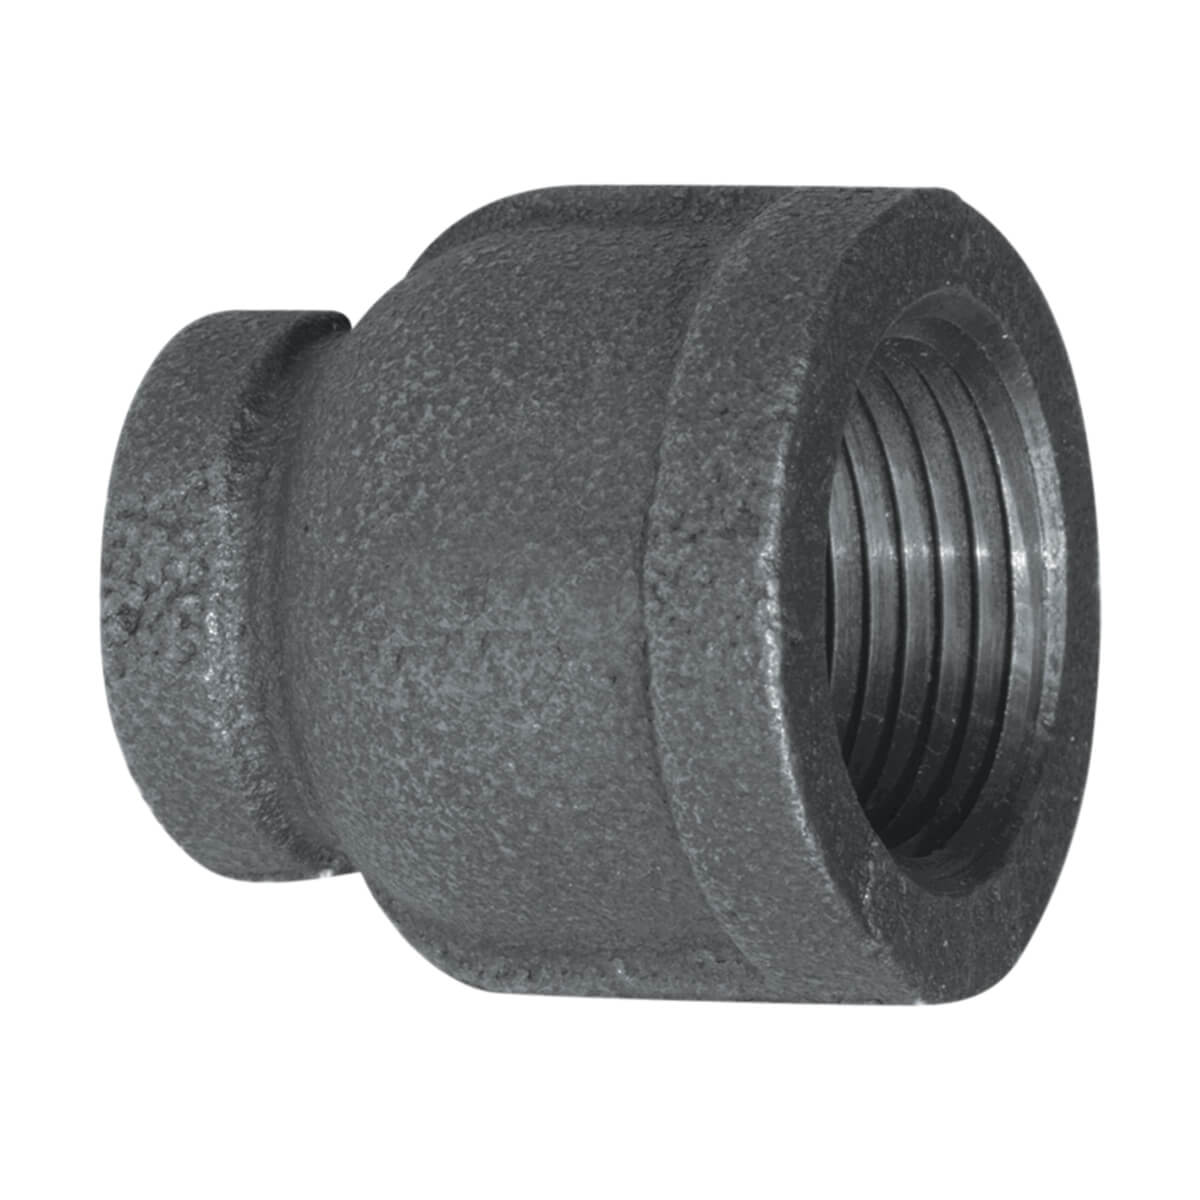 Fitting Black Iron Reducer Coupling - 1-1/4-in x 1-in